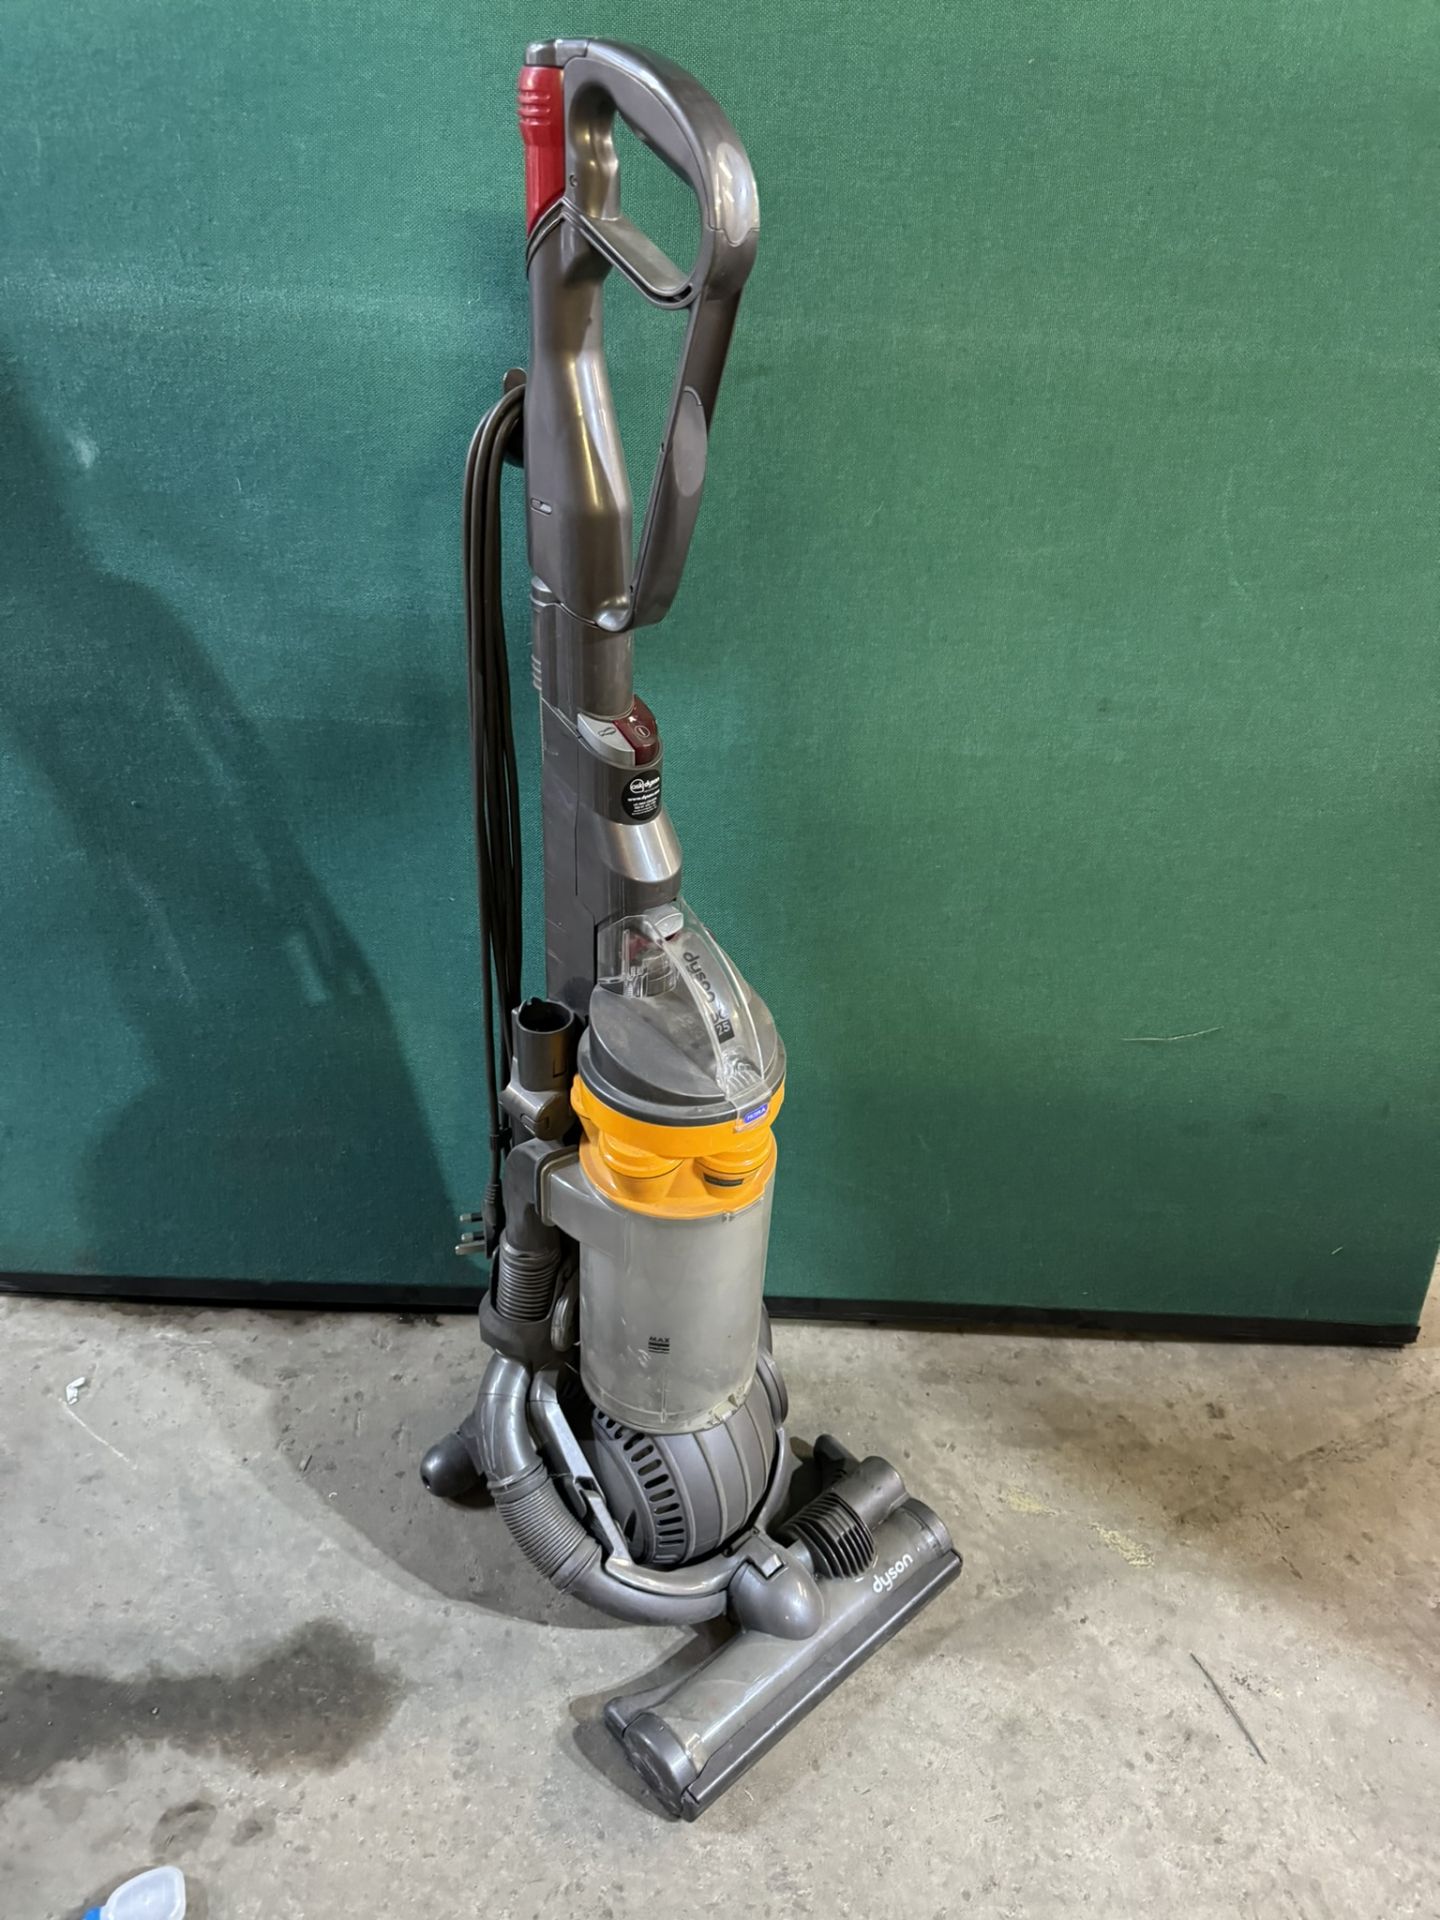 Dyson DC25 Ball All-Floors Upright Vacuum Cleaner - Image 2 of 5